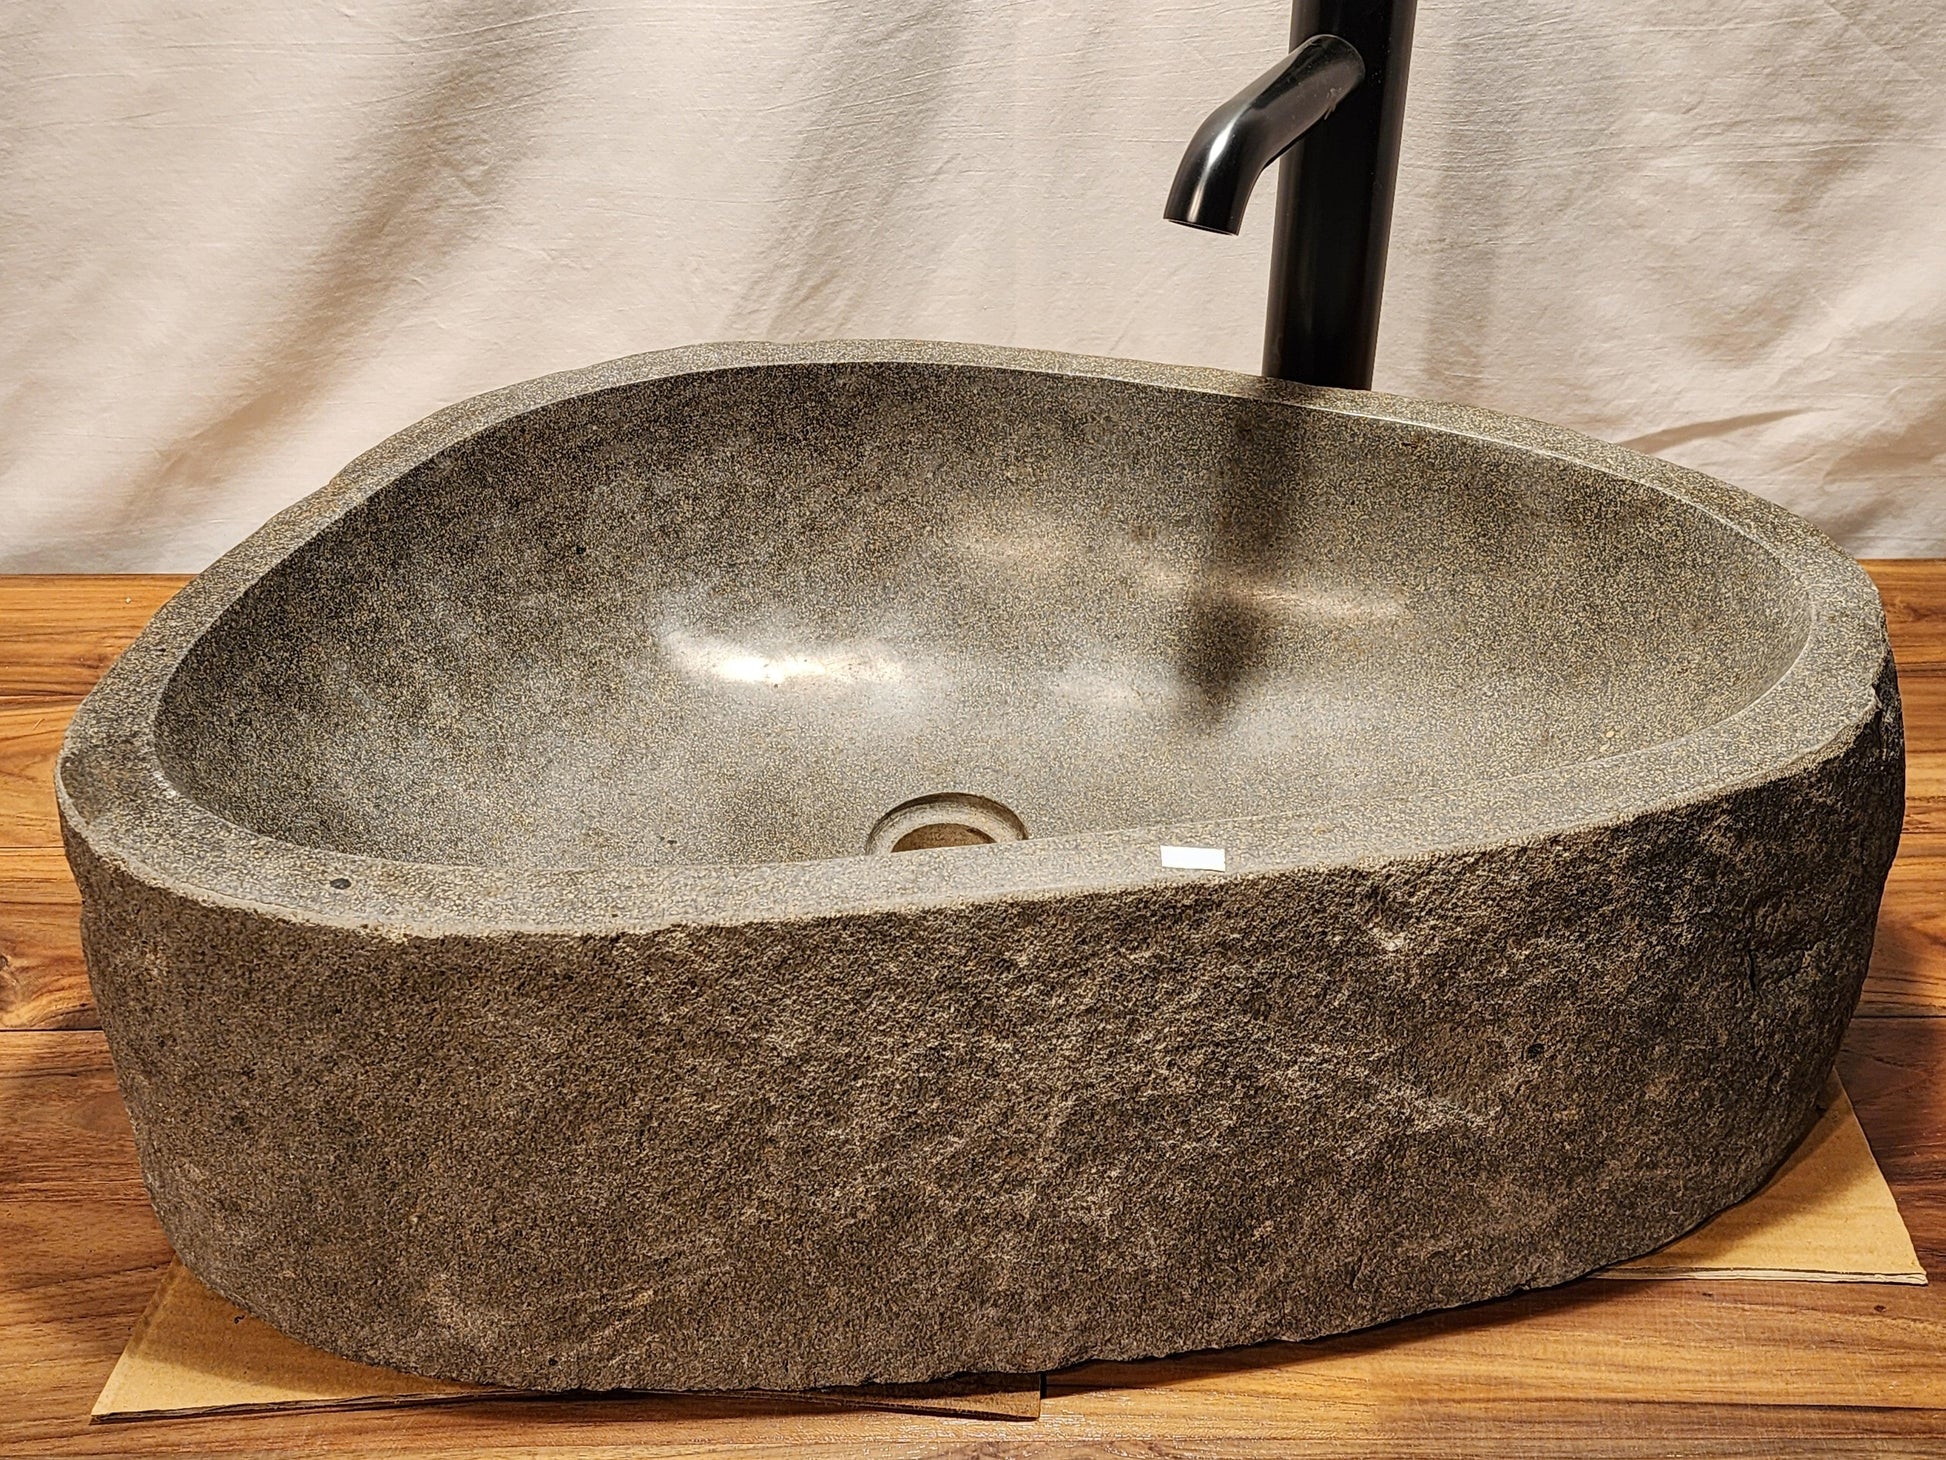 Andesite Natural Stone Vessel Sink, AND5 - Impact Imports